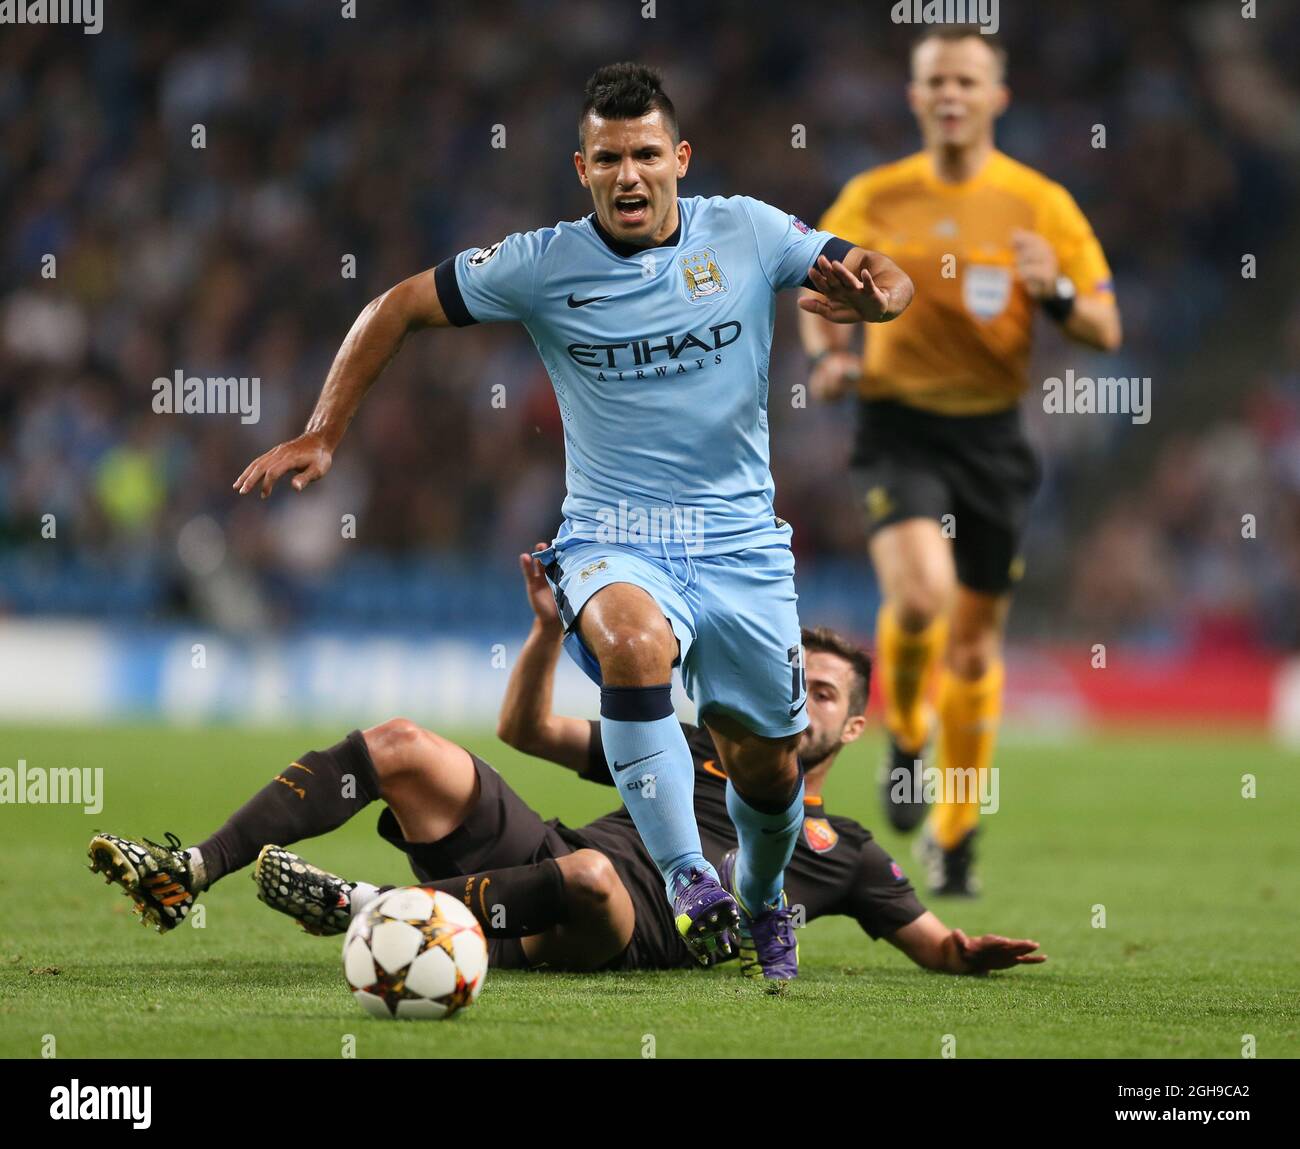 Miralem Pjanic of Roma tackles Sergio Aguero of Manchester City during UEFA Champions League group E match between Manchester City and Roma held at Etihad Stadium in Manchester, England on 30th September 2014. Stock Photo